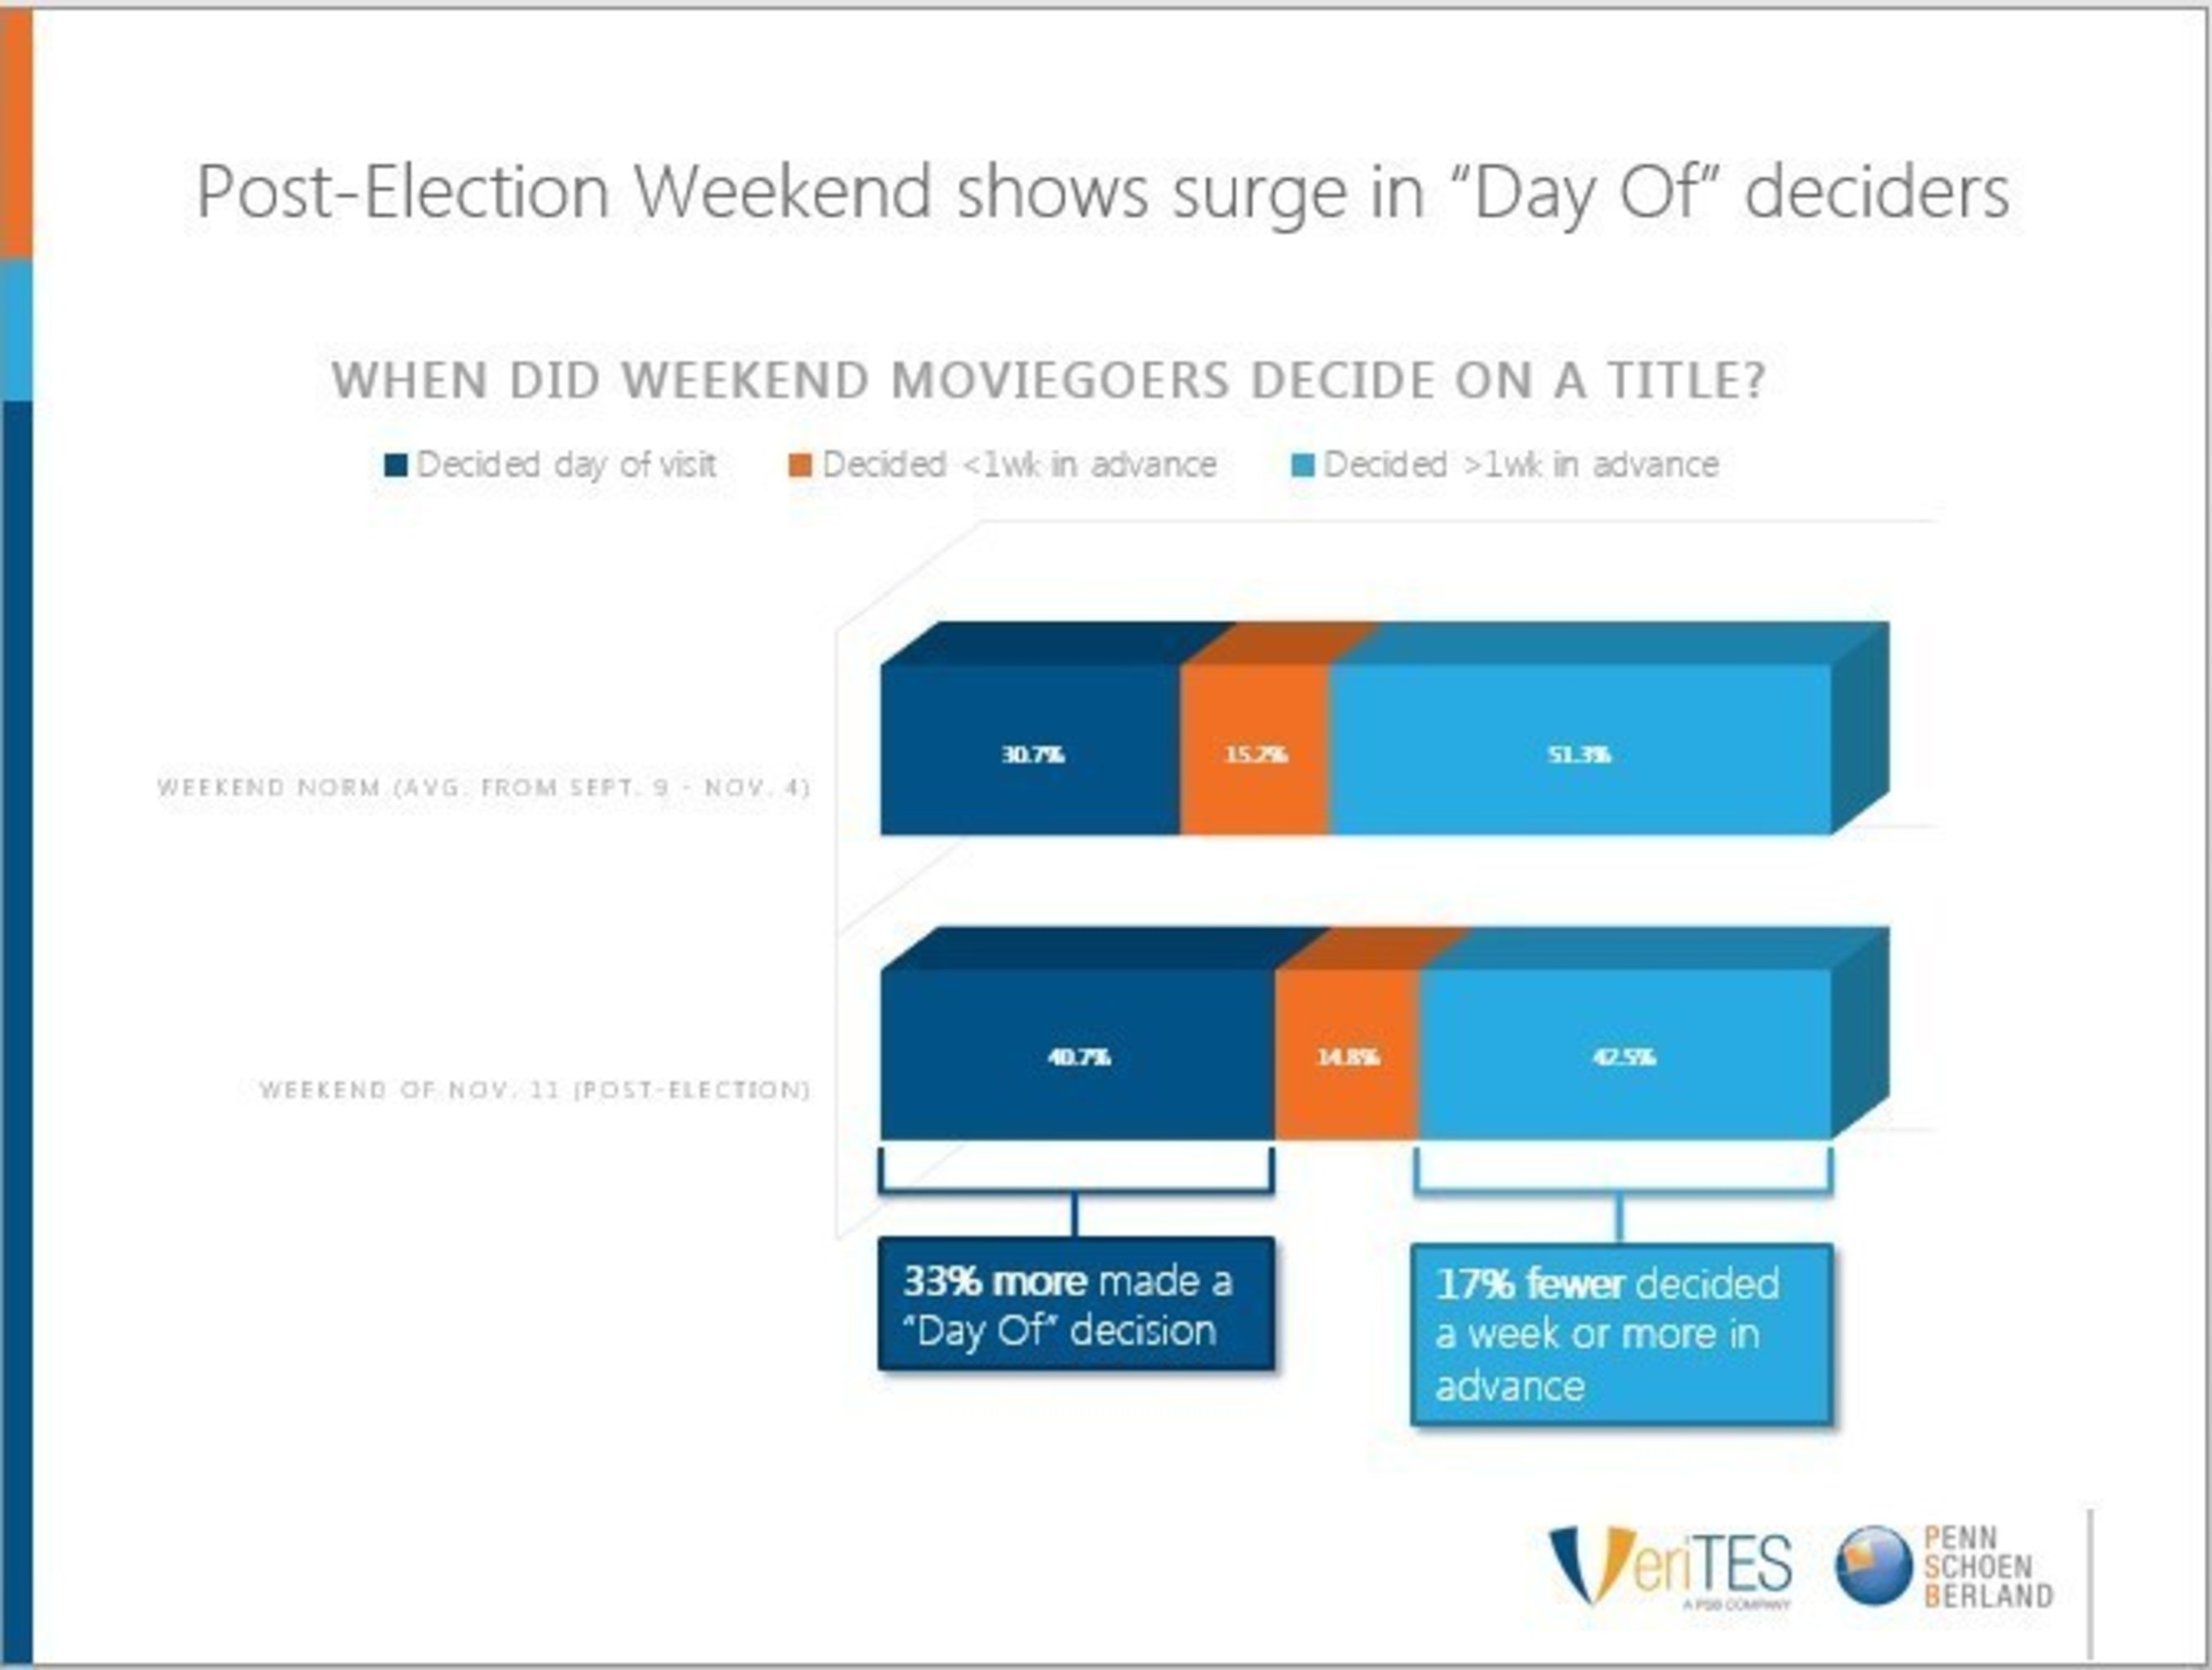 Post-election weekend shows surge in "Day Of" deciders